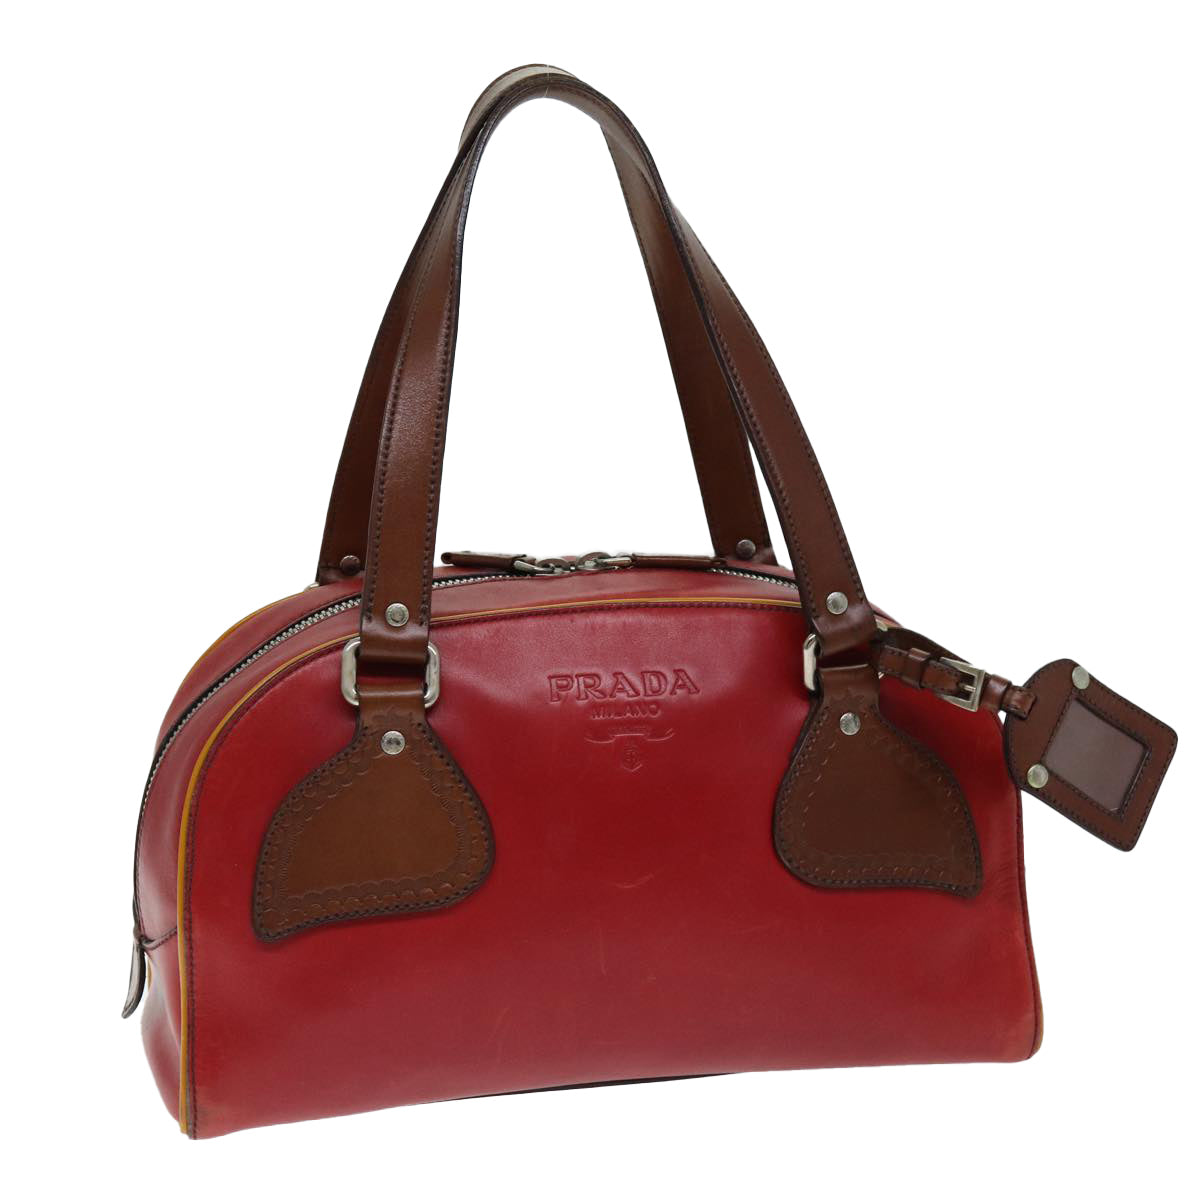 PRADA Hand Bag Leather Red Auth 74713